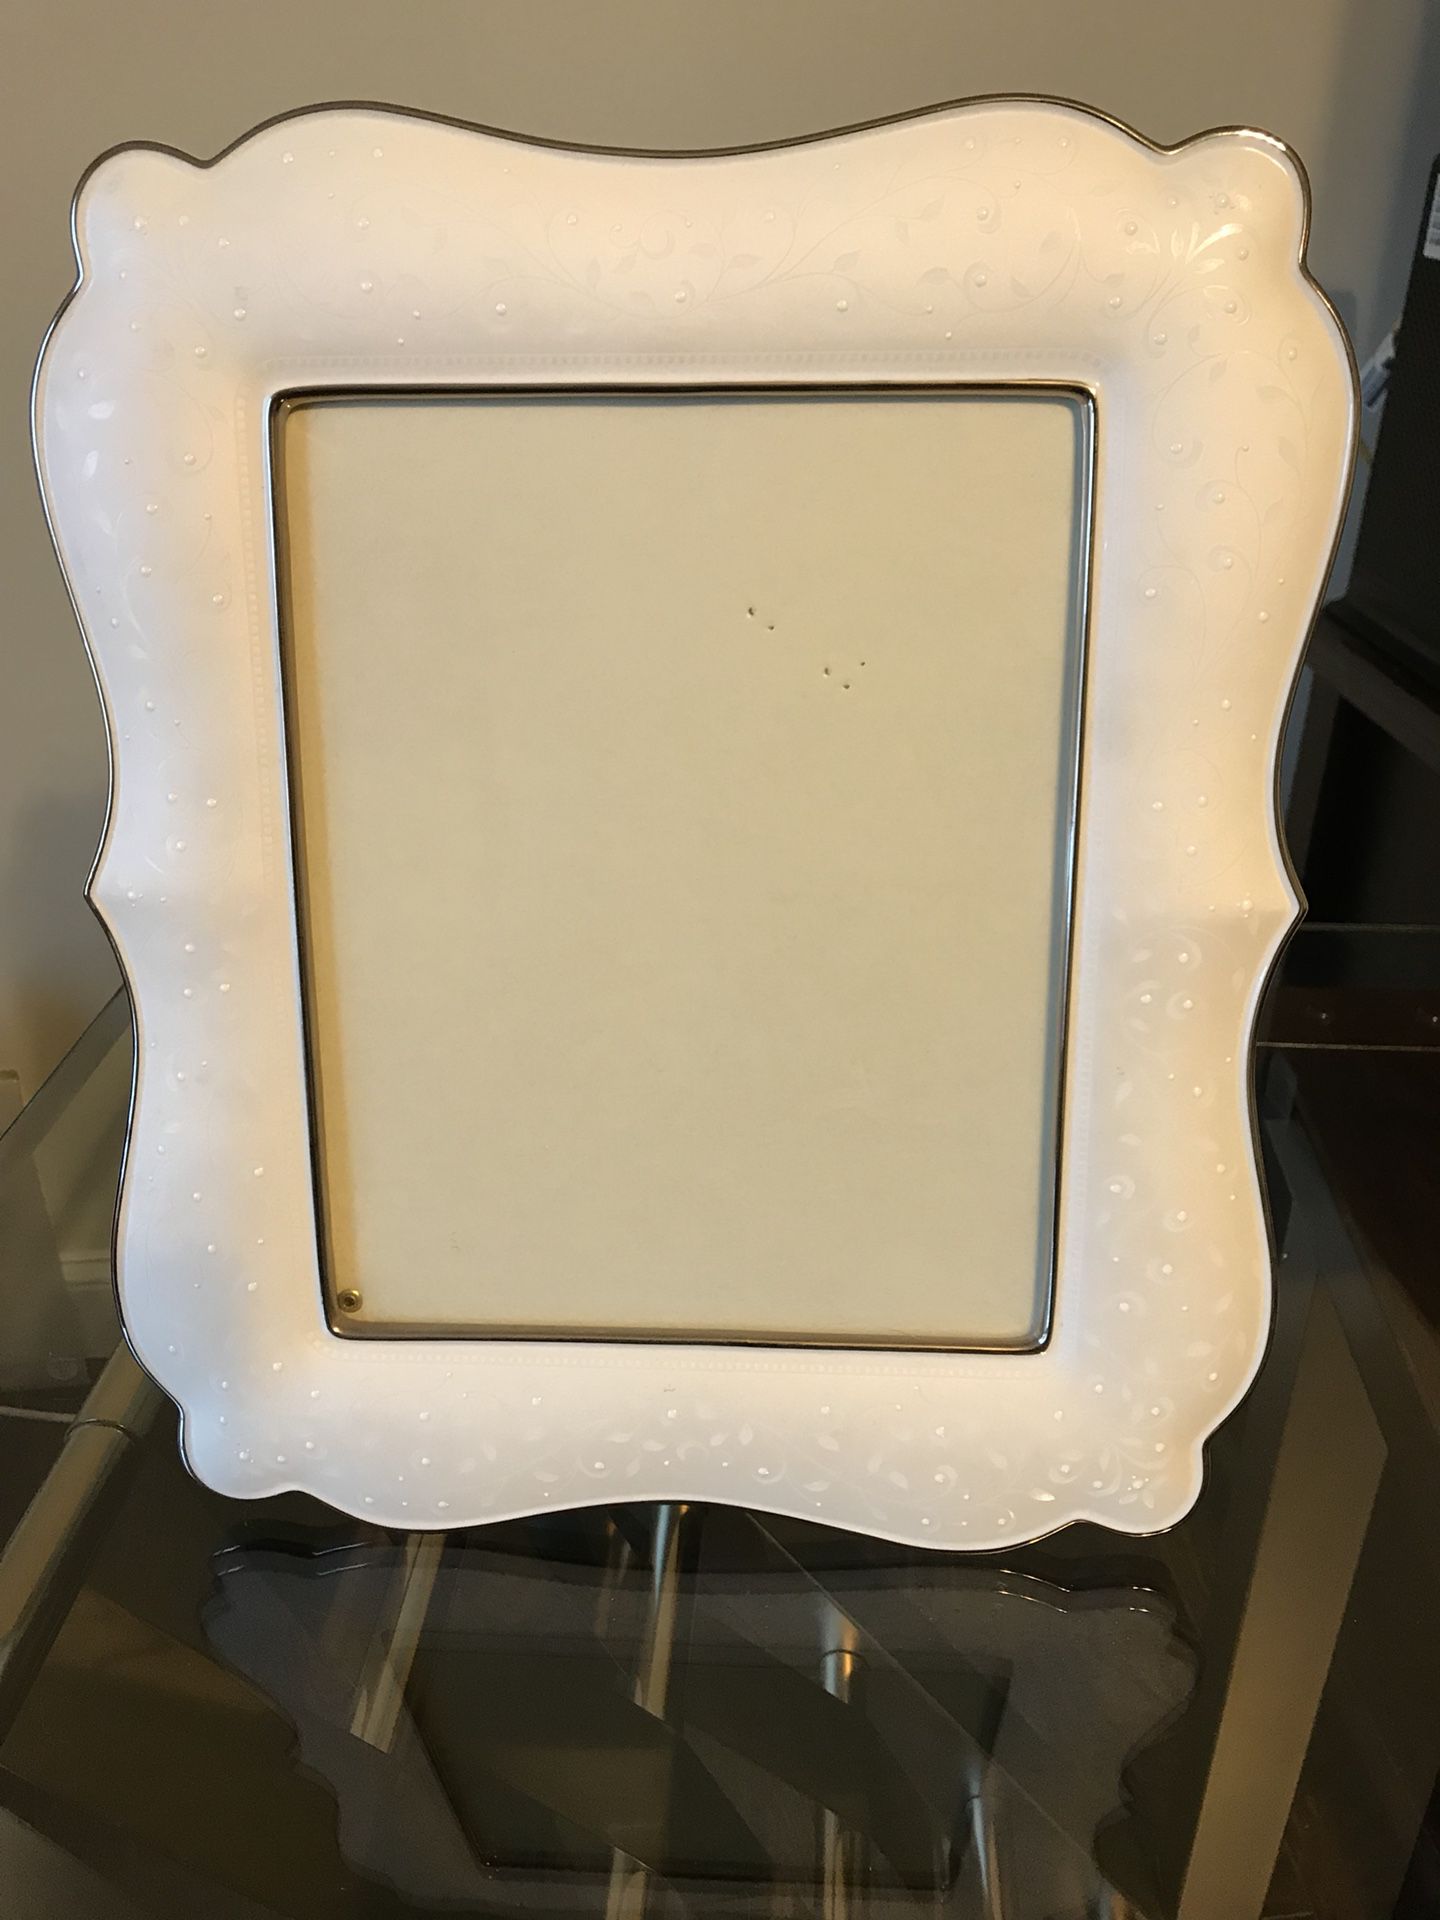 Lenox picture frame - “pearl” details